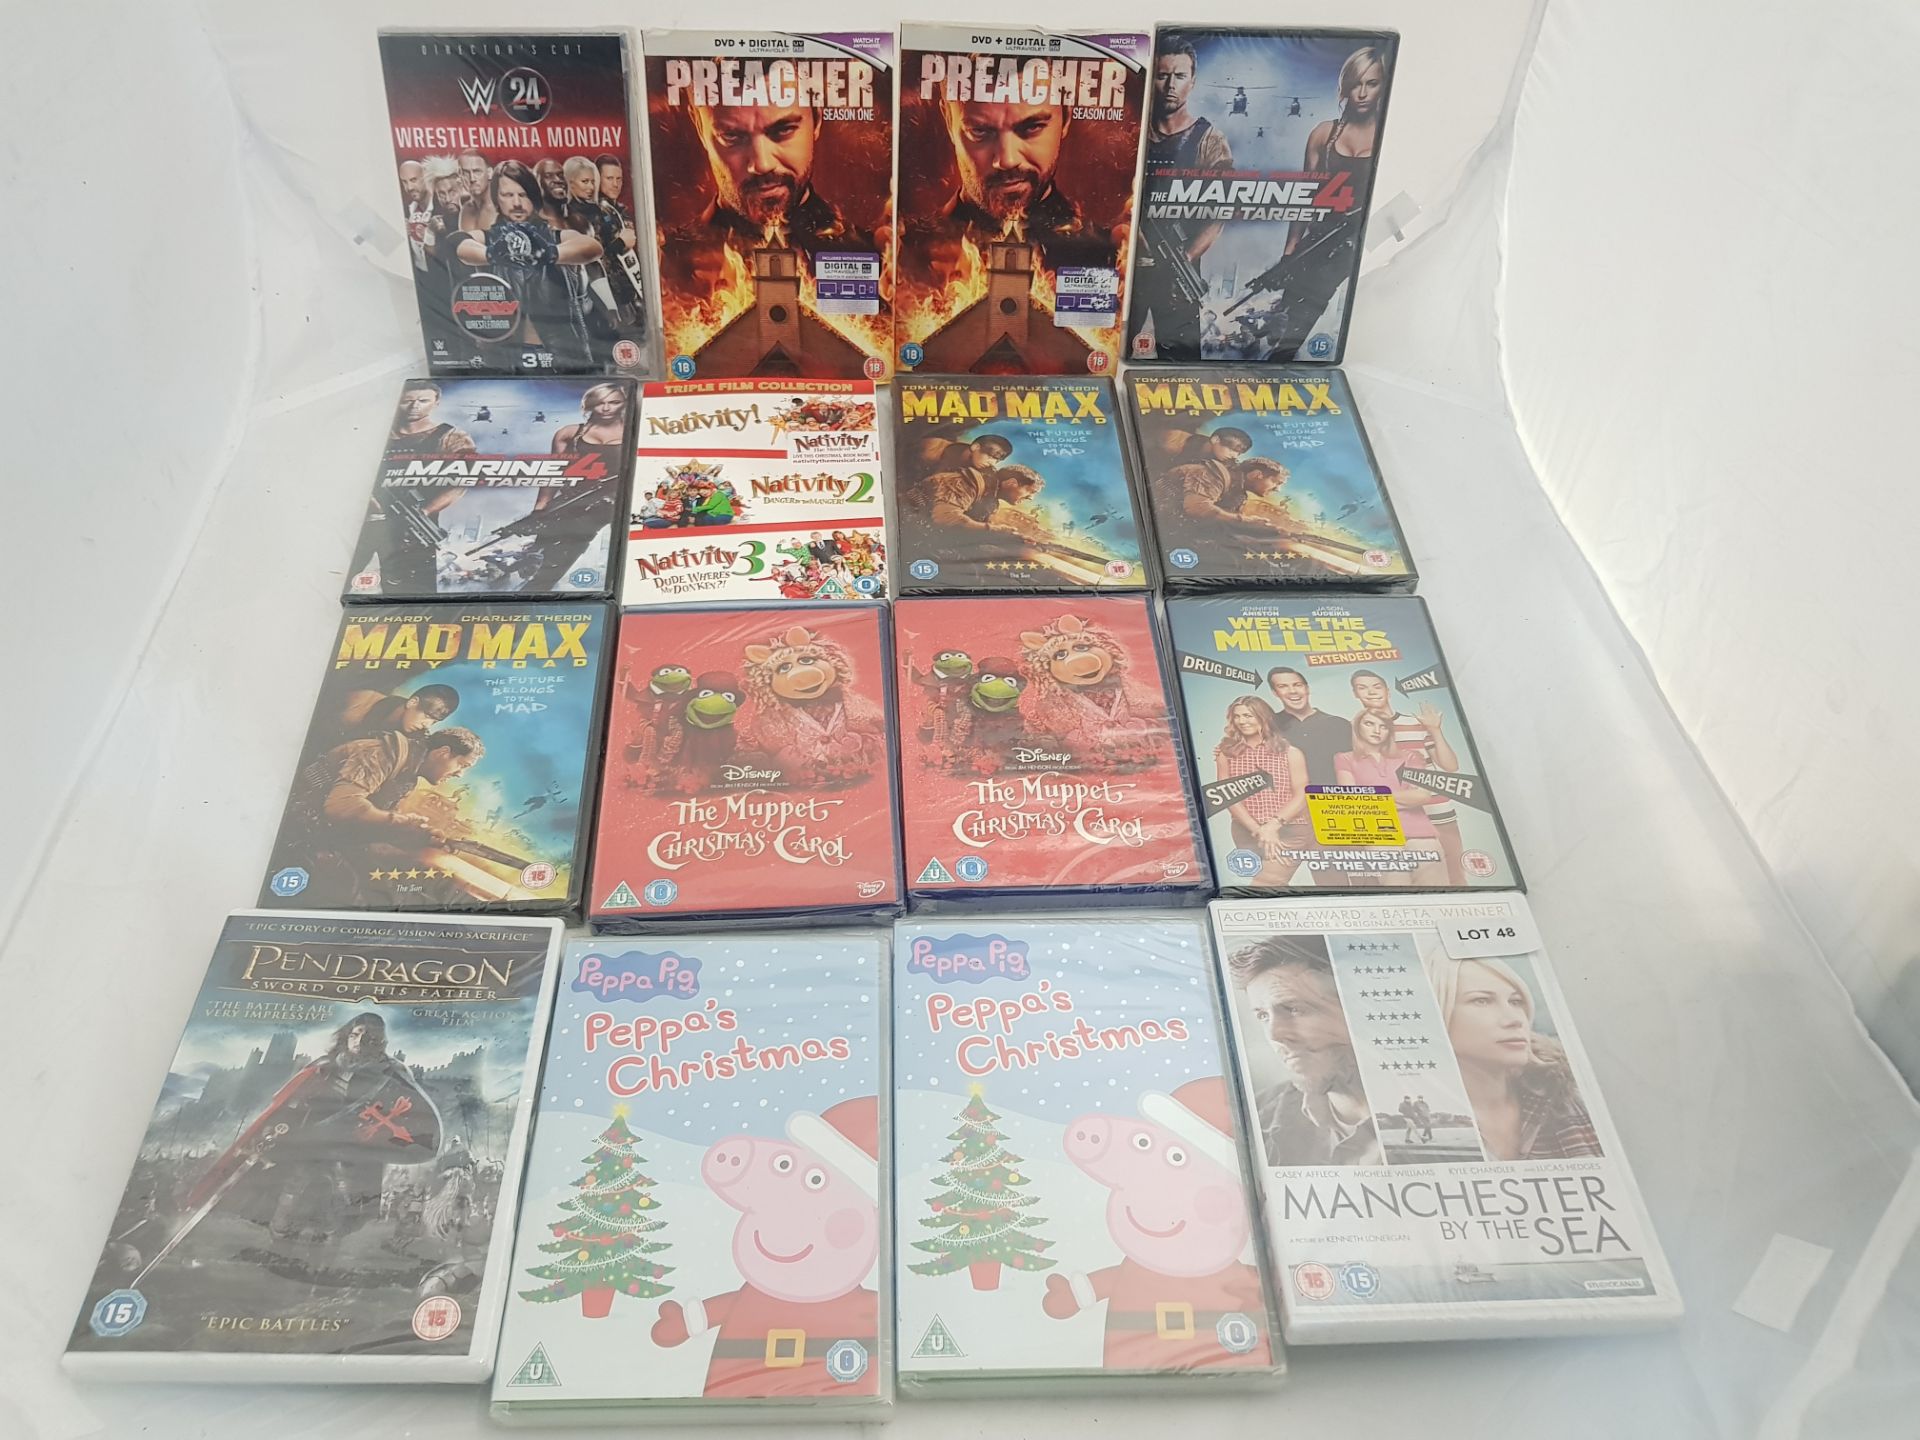 16 x Asst DVDs to include Peppa's Christmas, Mad Max, Manchester by the Sea, Preacher, WWF...